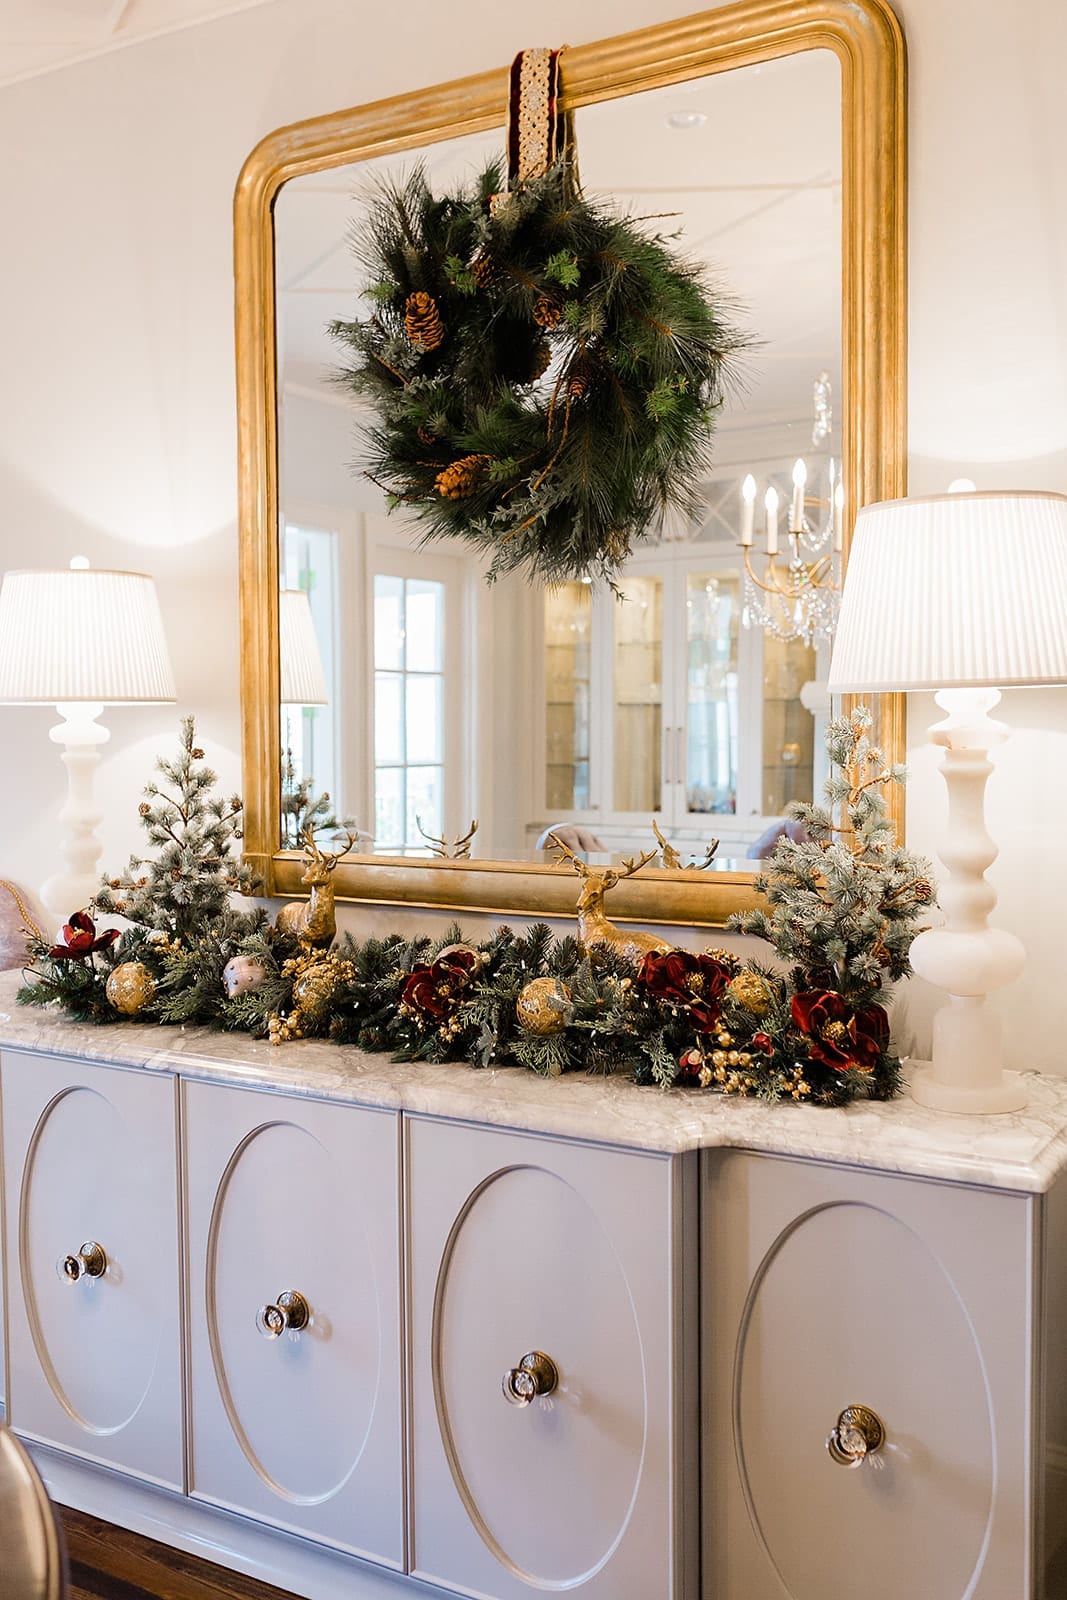 Christmas dining decor ideas. Gold ornate mirror with wreath hanging with Frontgate ribbon and white marble lamps.